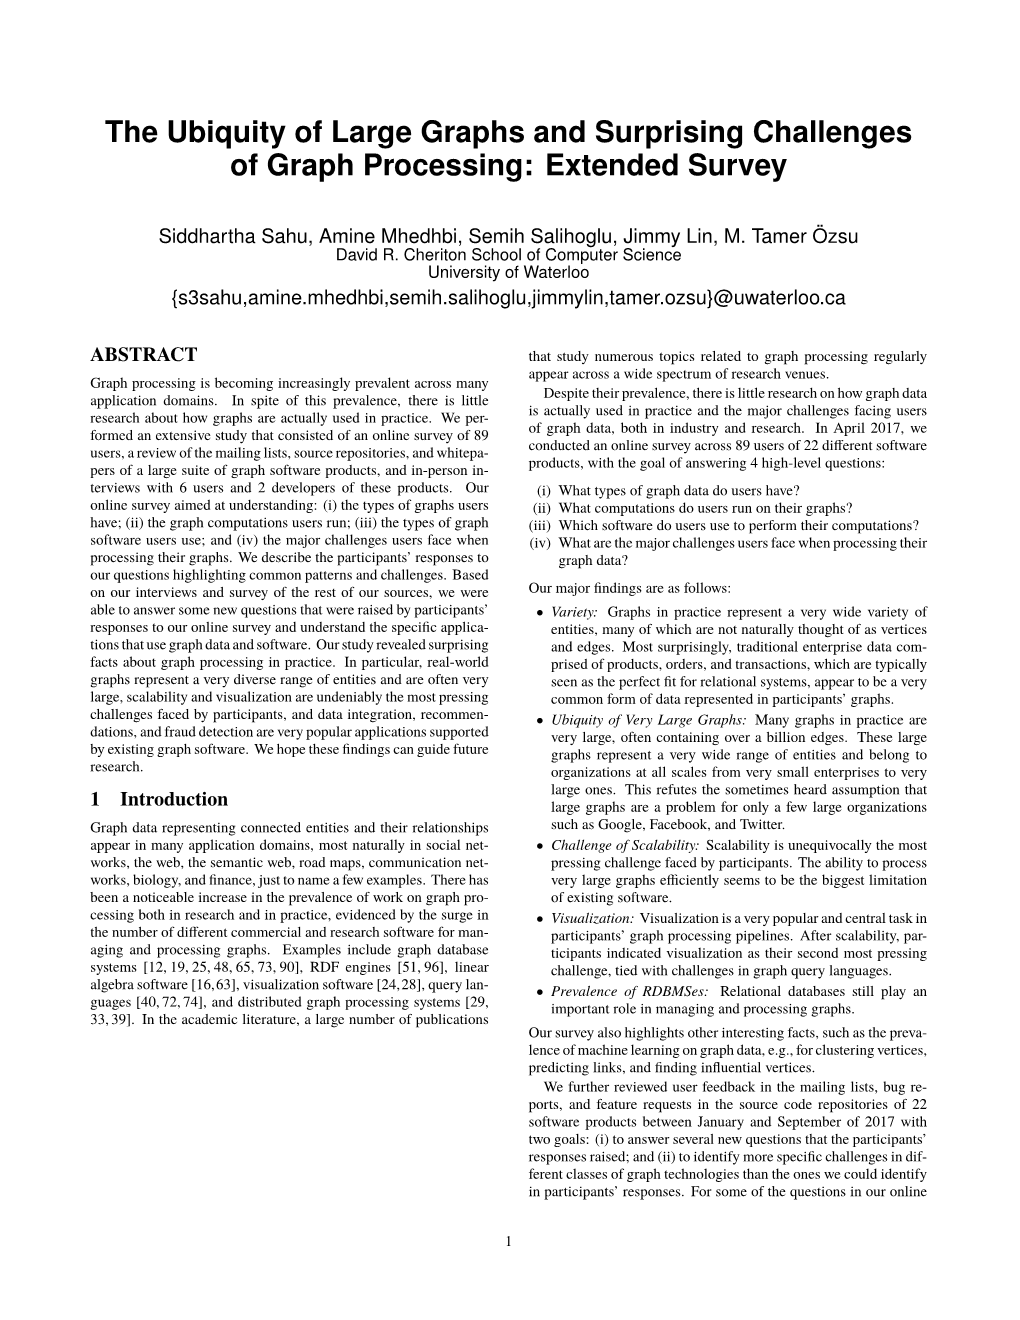 The Ubiquity of Large Graphs and Surprising Challenges of Graph Processing: Extended Survey